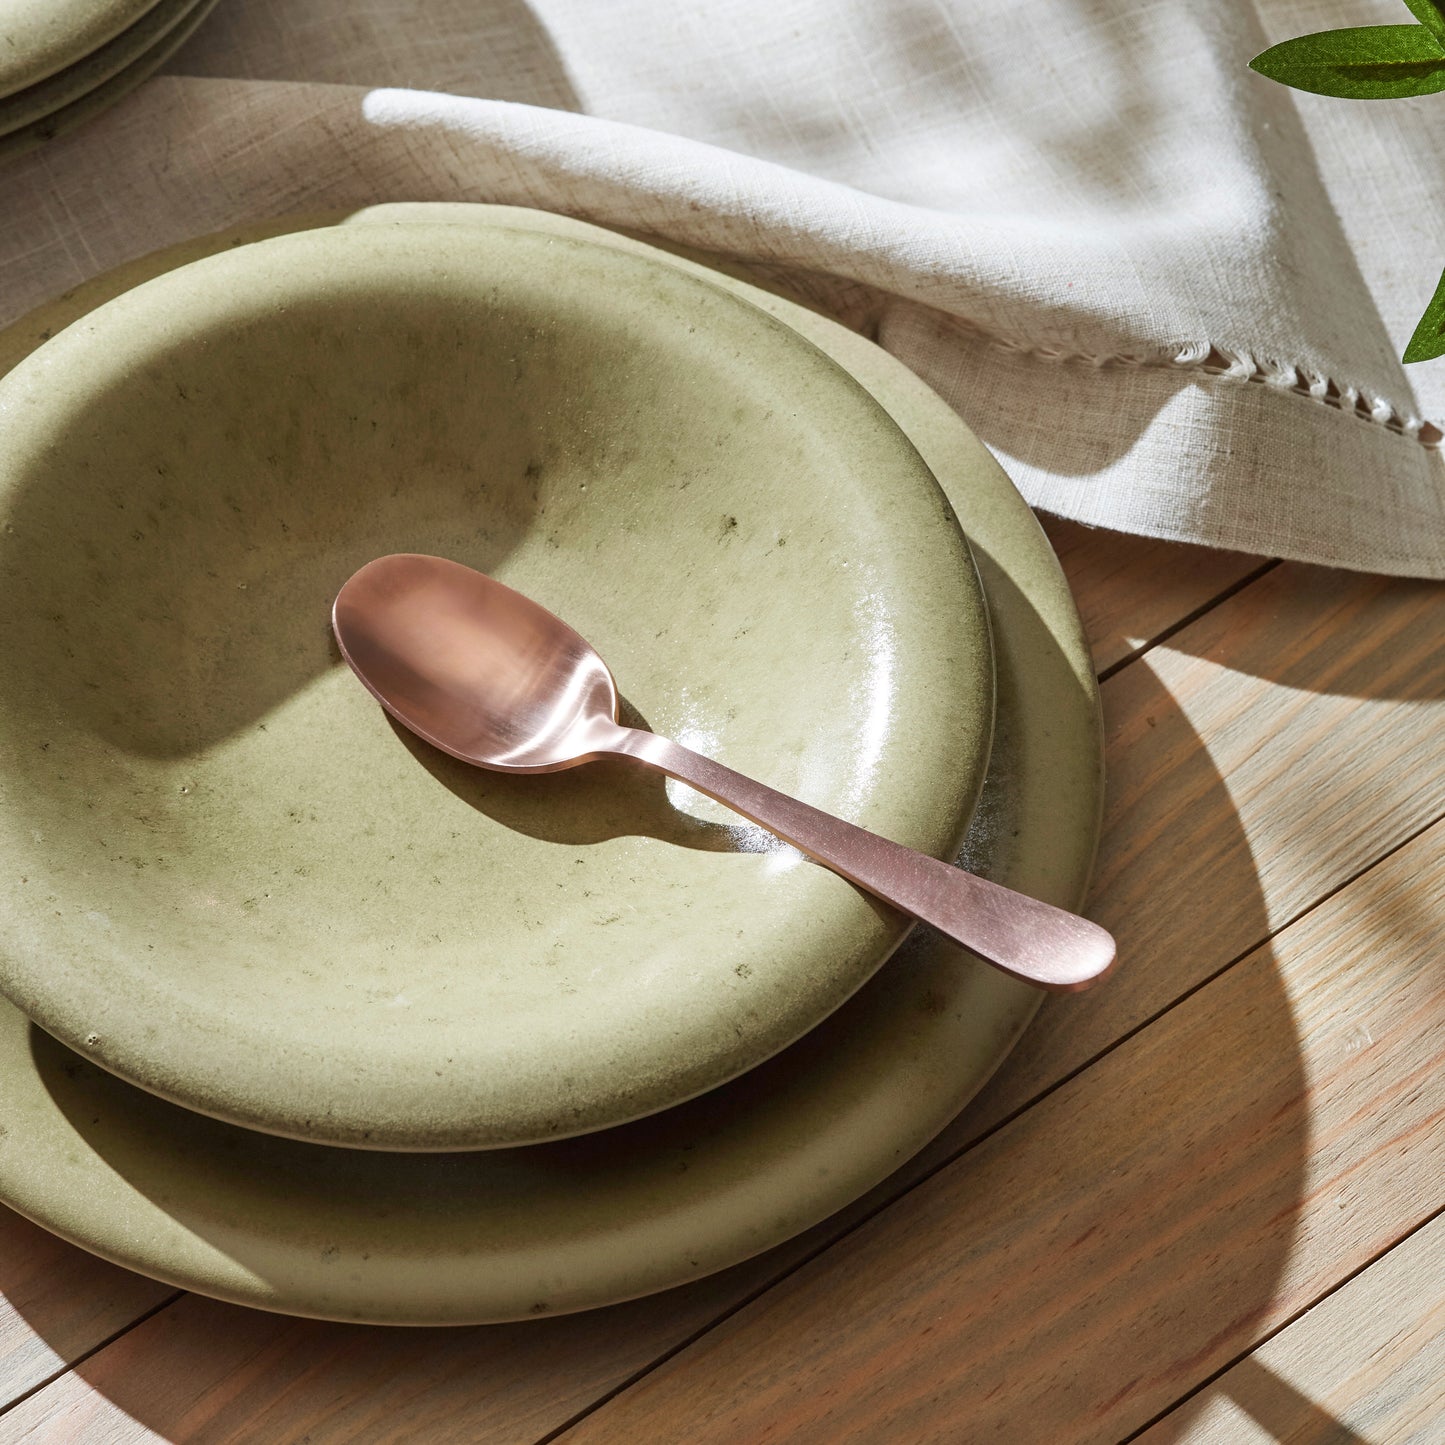 Aro Stoneware Dinnerware Set - Green Matte - Crafted in Portugal - Scratch-Resistant